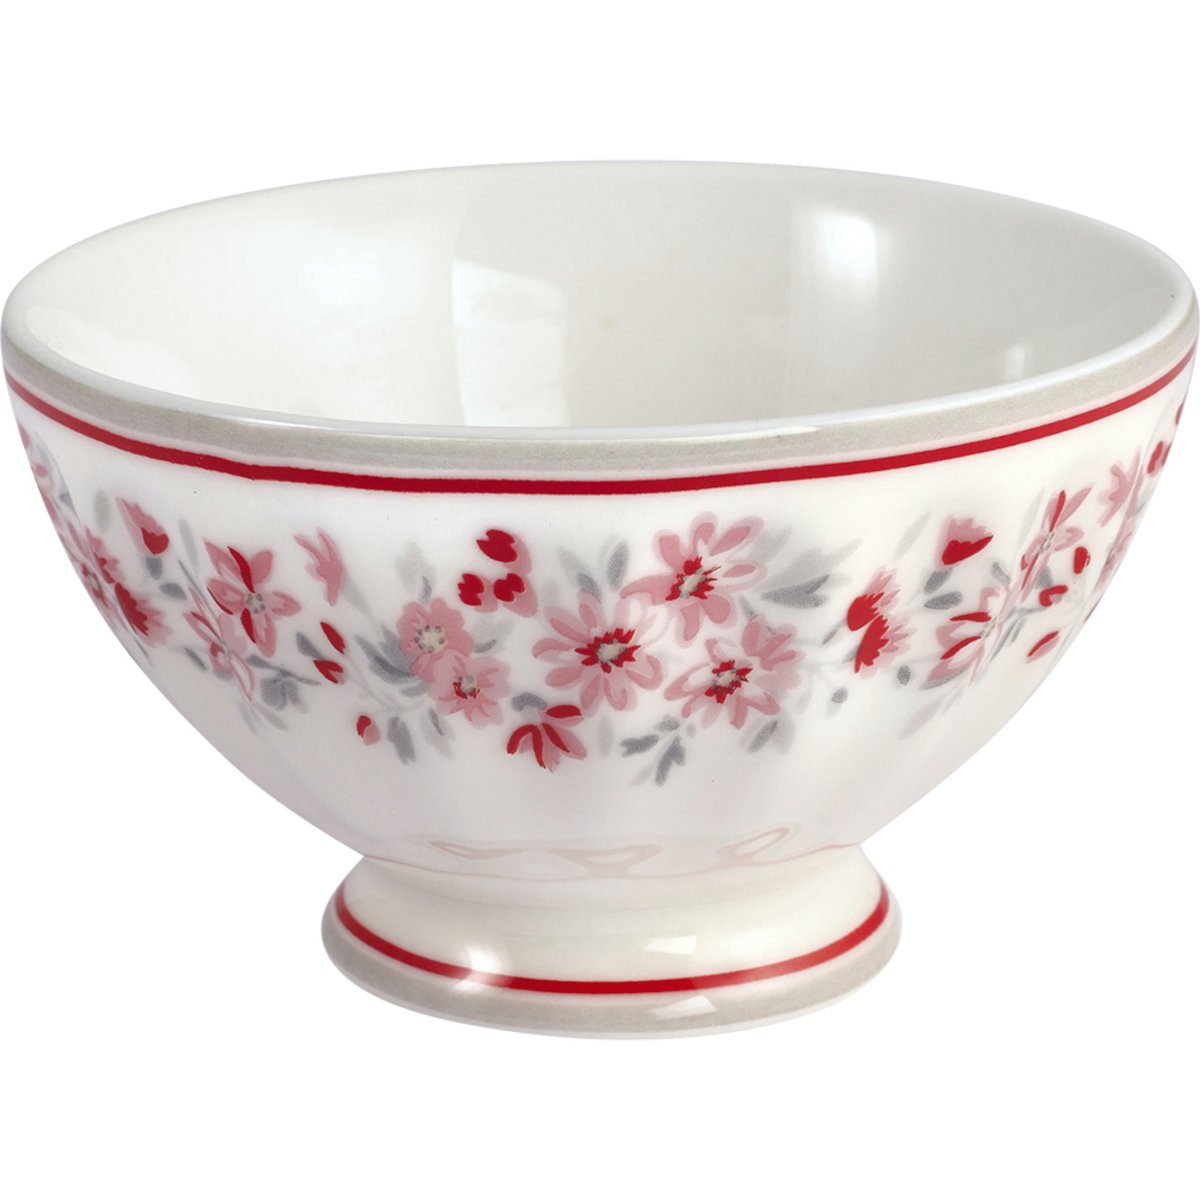 Bowl 0,18l Greengate Schale Emberly French weiss